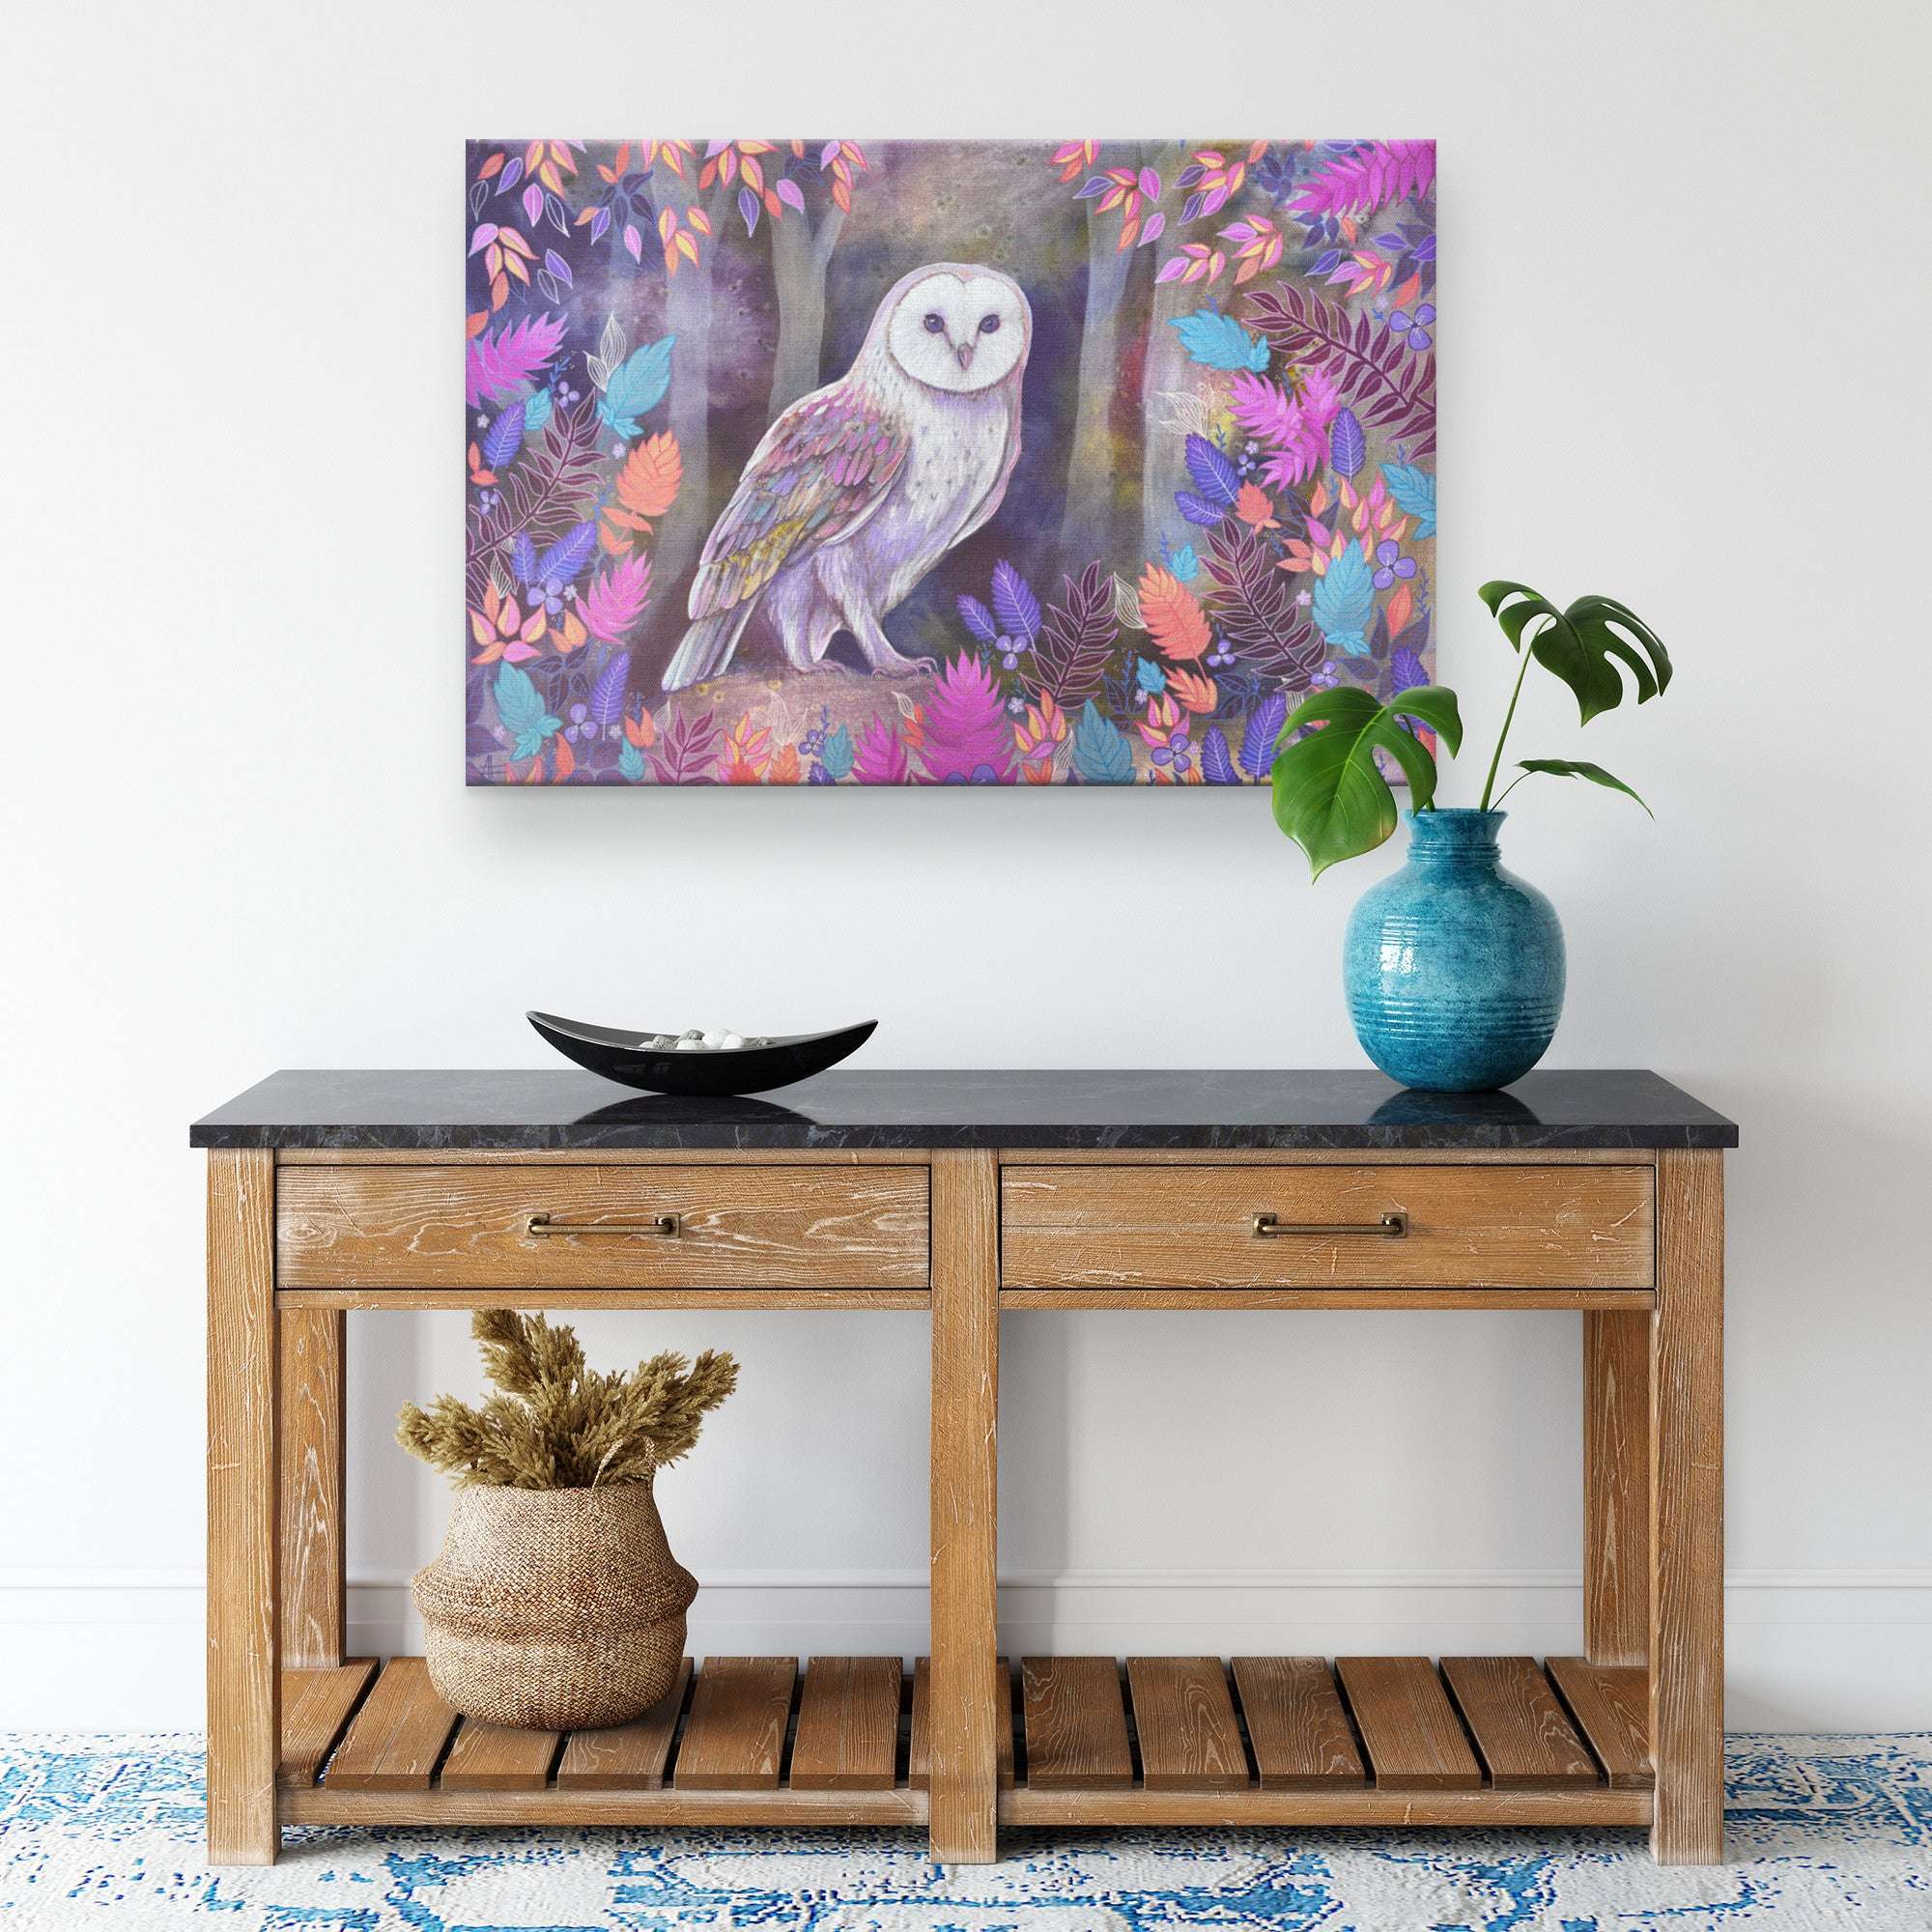 A colorful Canvas Owl Art Print of a barn owl on a wall above a wooden table.